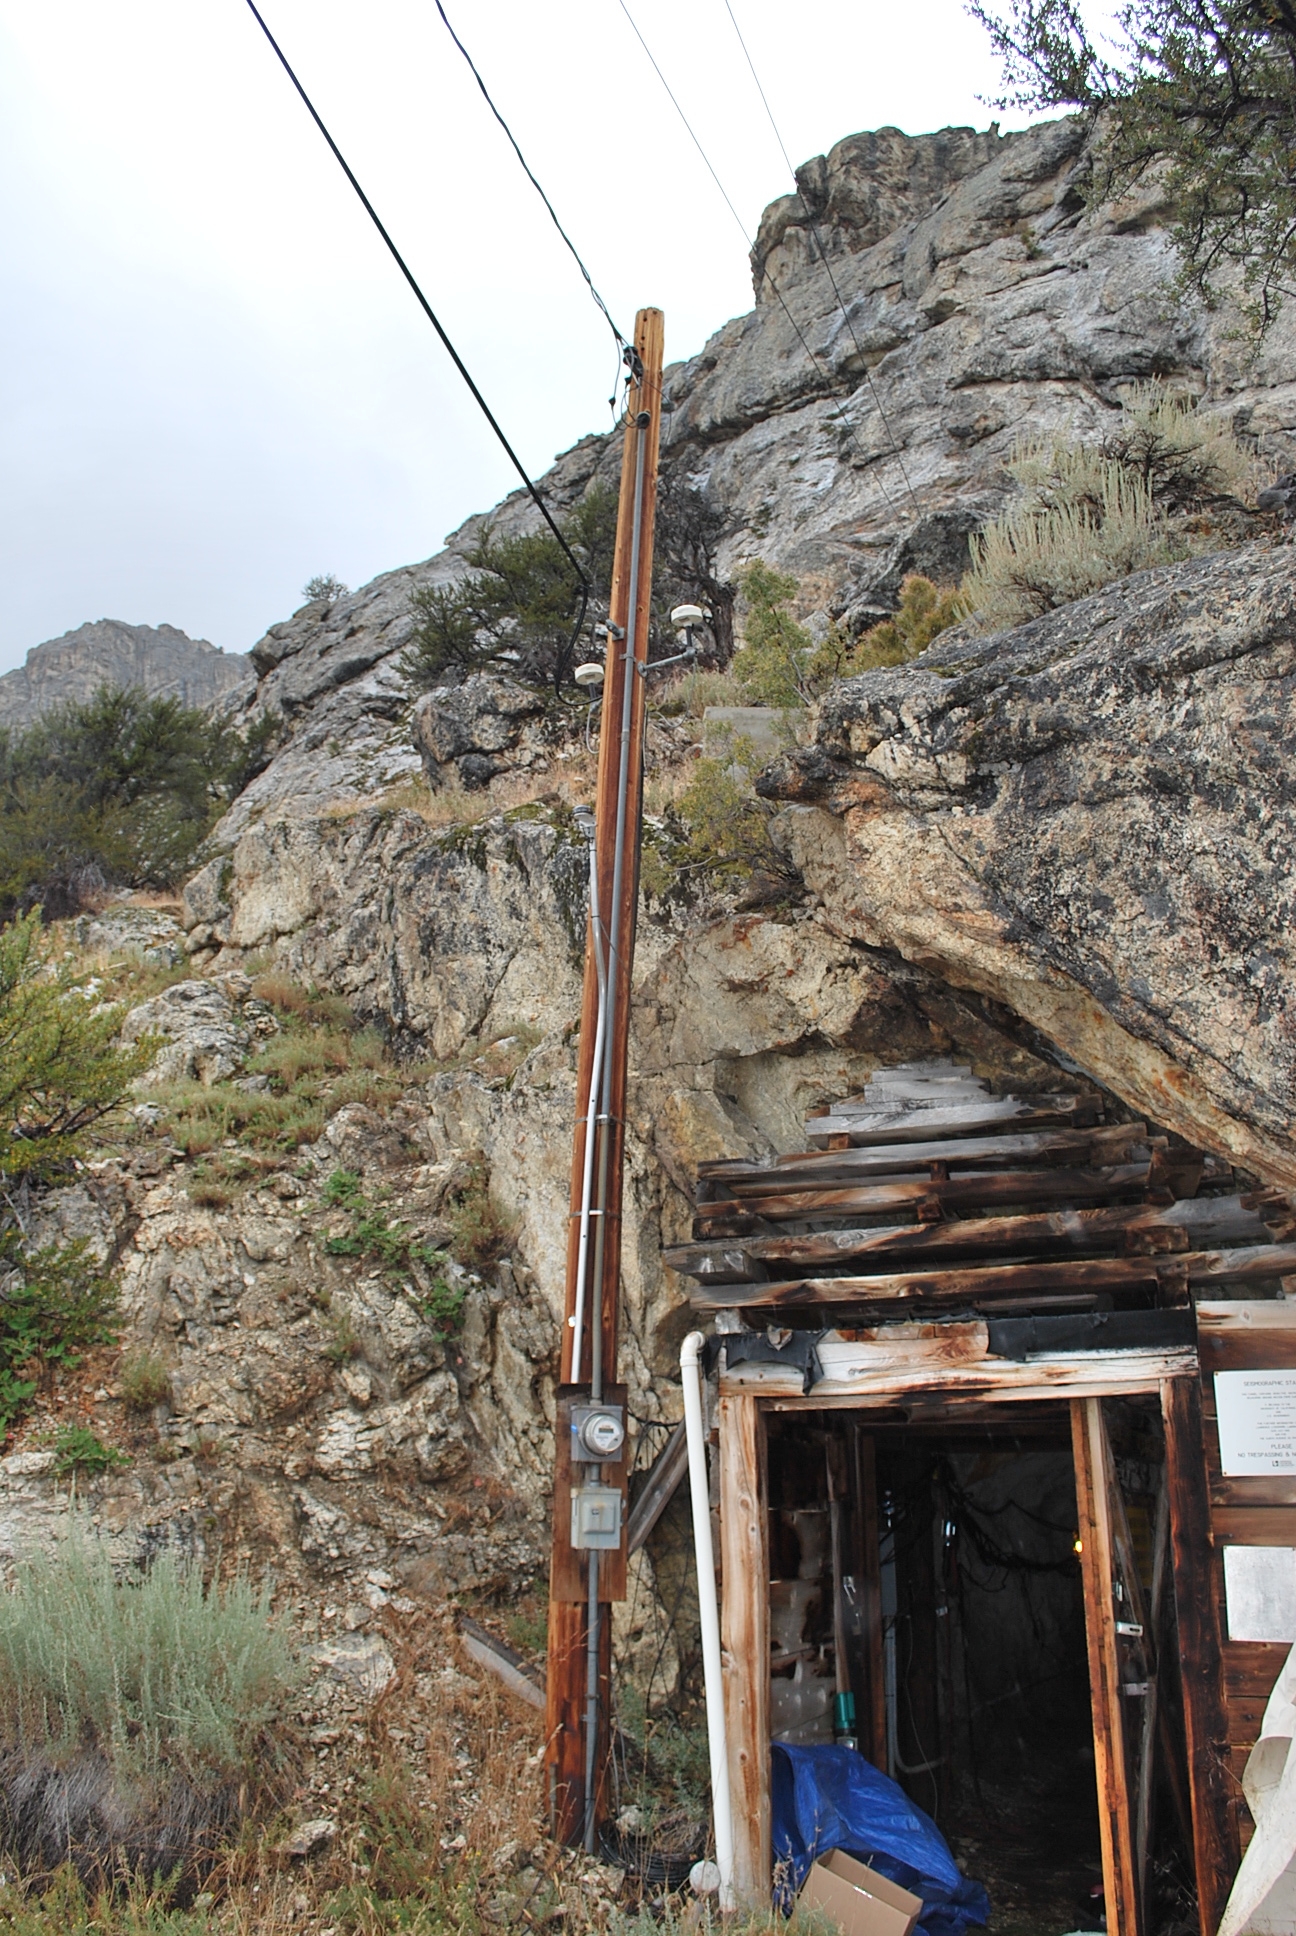 A telephone looking pole with a wooden building built into the rocky mountain behind it. 